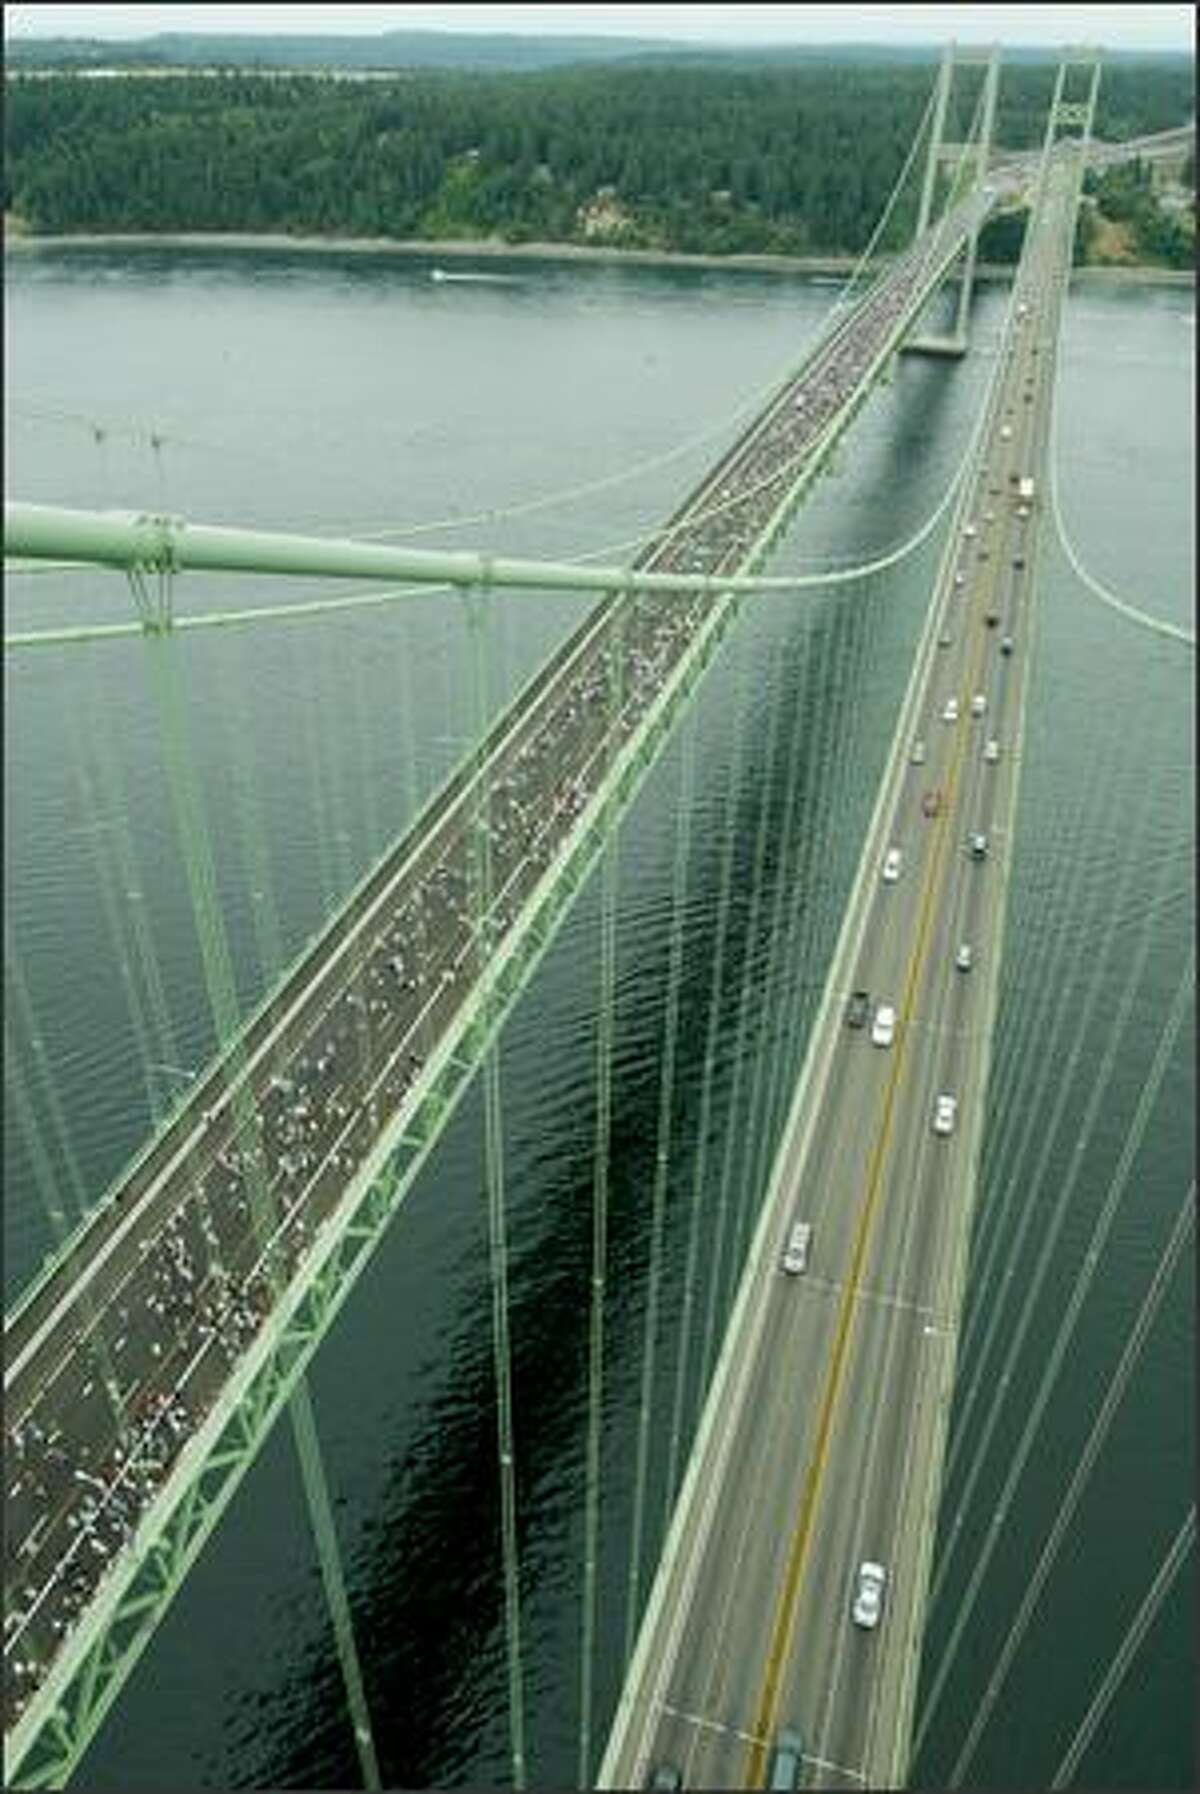 The new Tacoma Narrows Bridge, as seen from the top of the south tower of the old bridge.